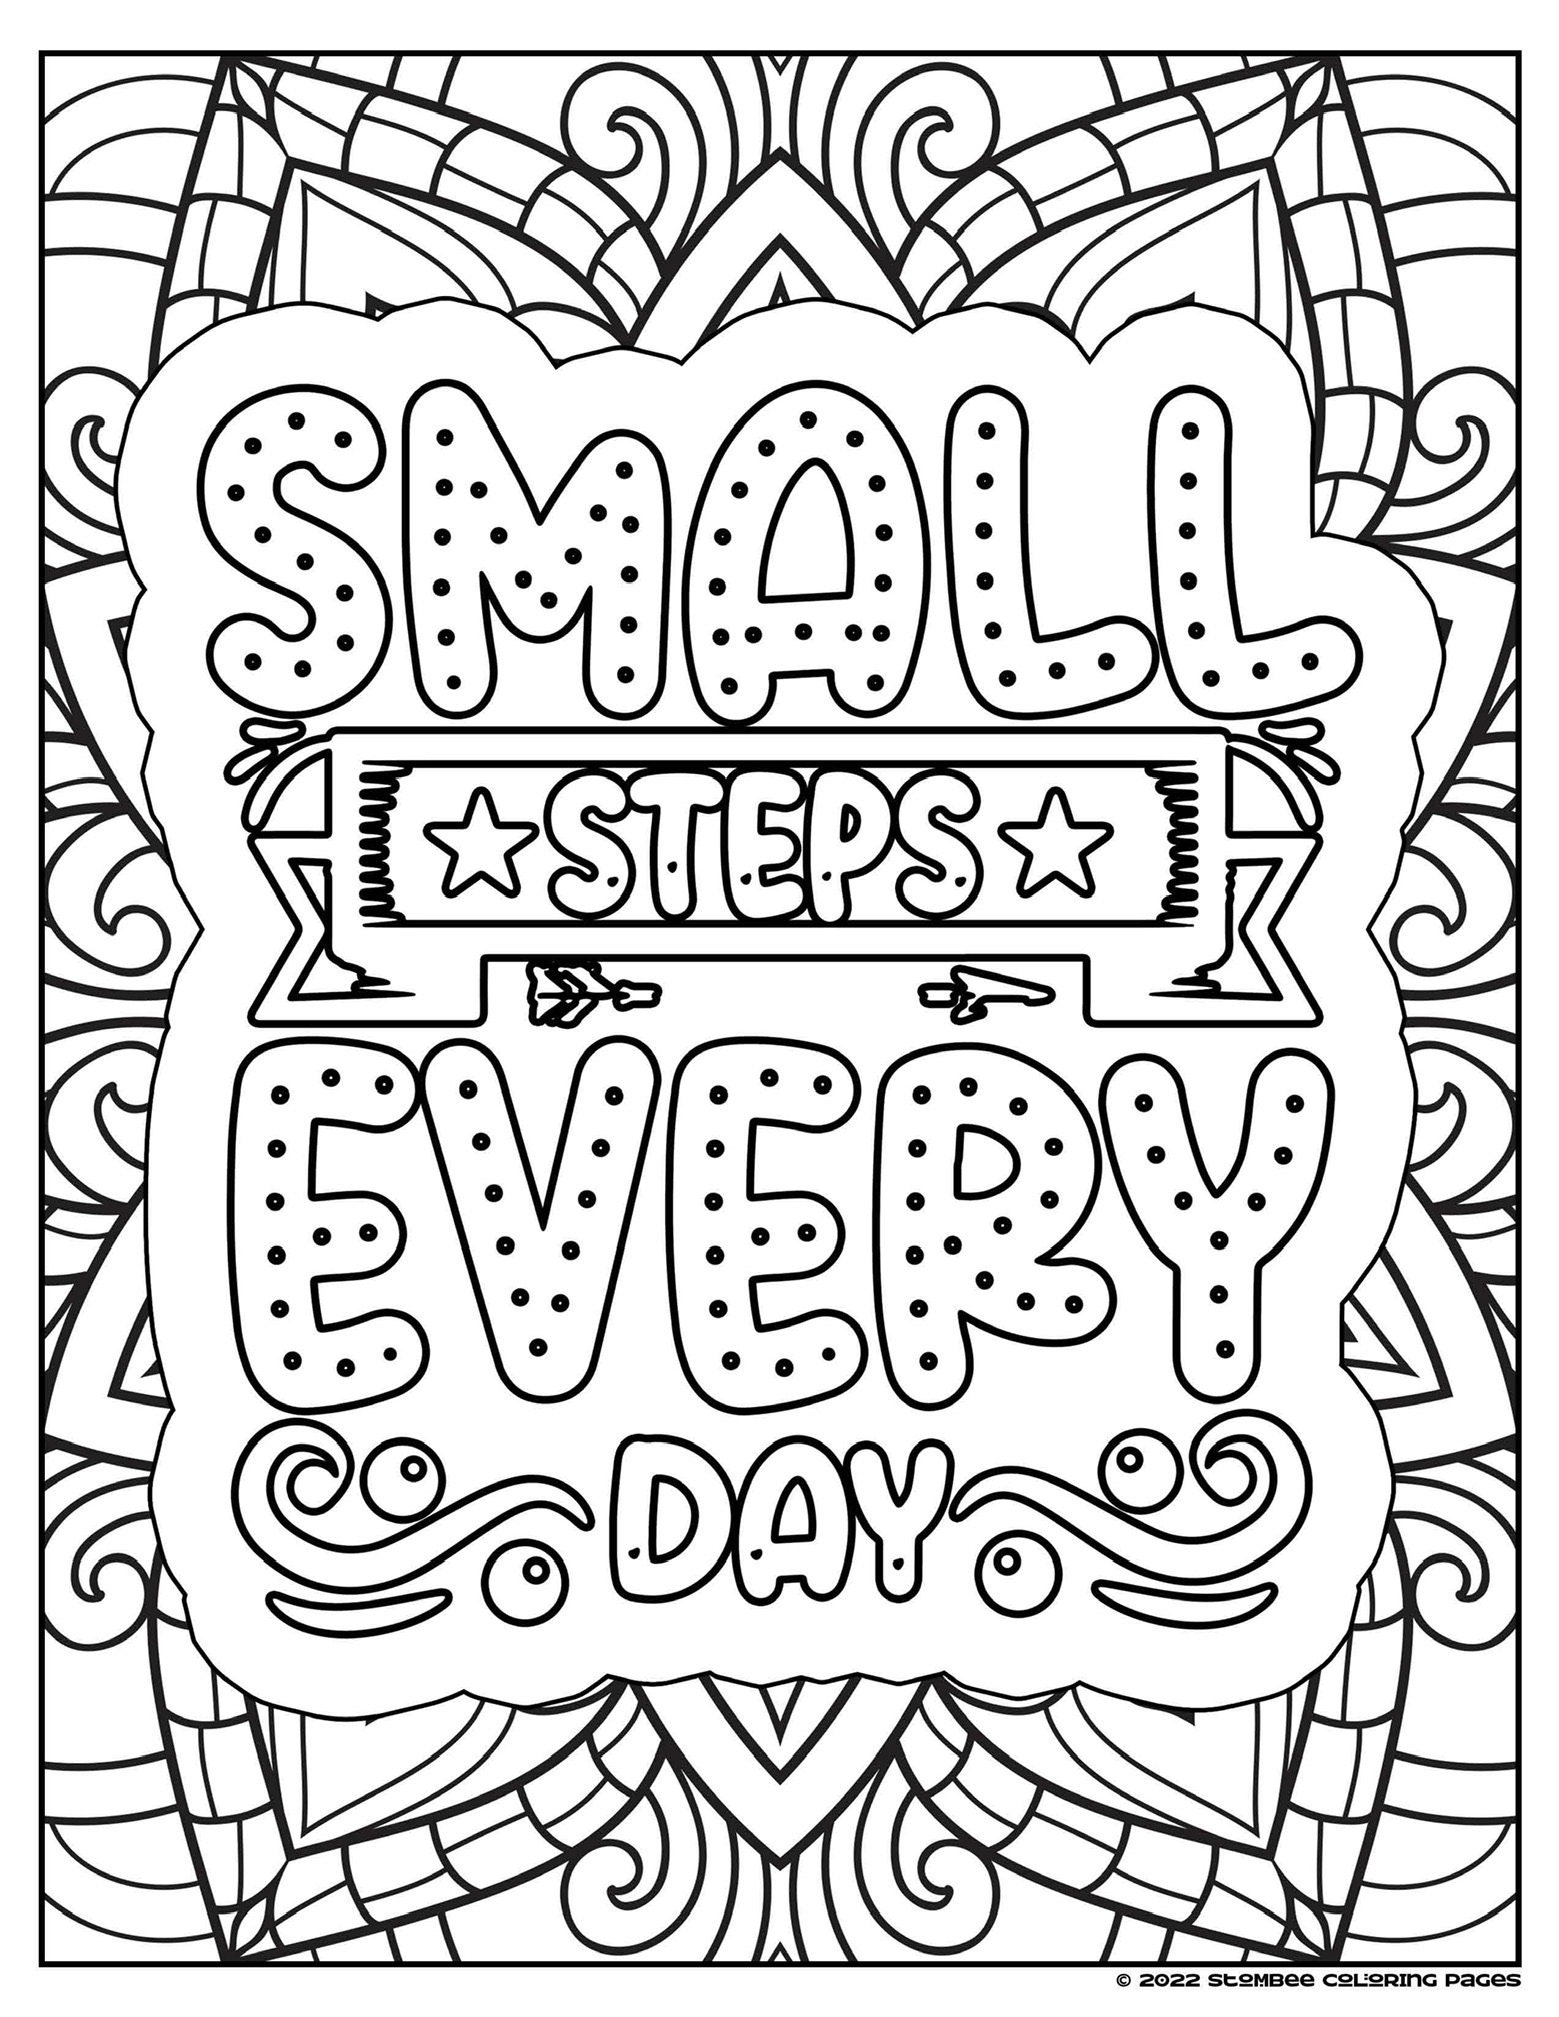 Coloring pages just for you